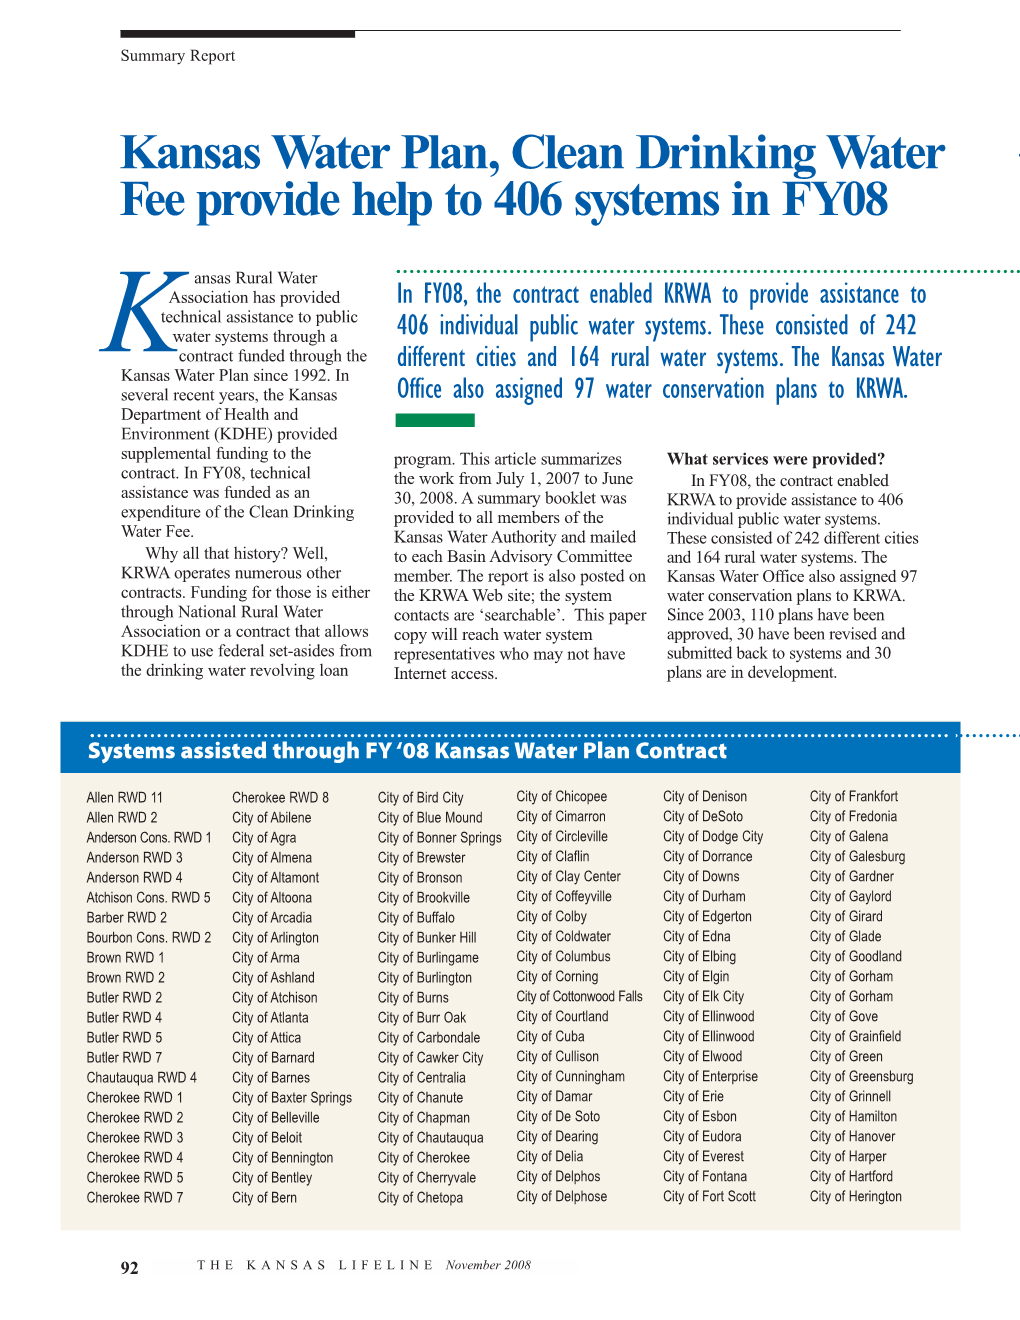 Kansas Water Plan, Clean Drinking Water Fee Provide Help to 406 Systems in FY08